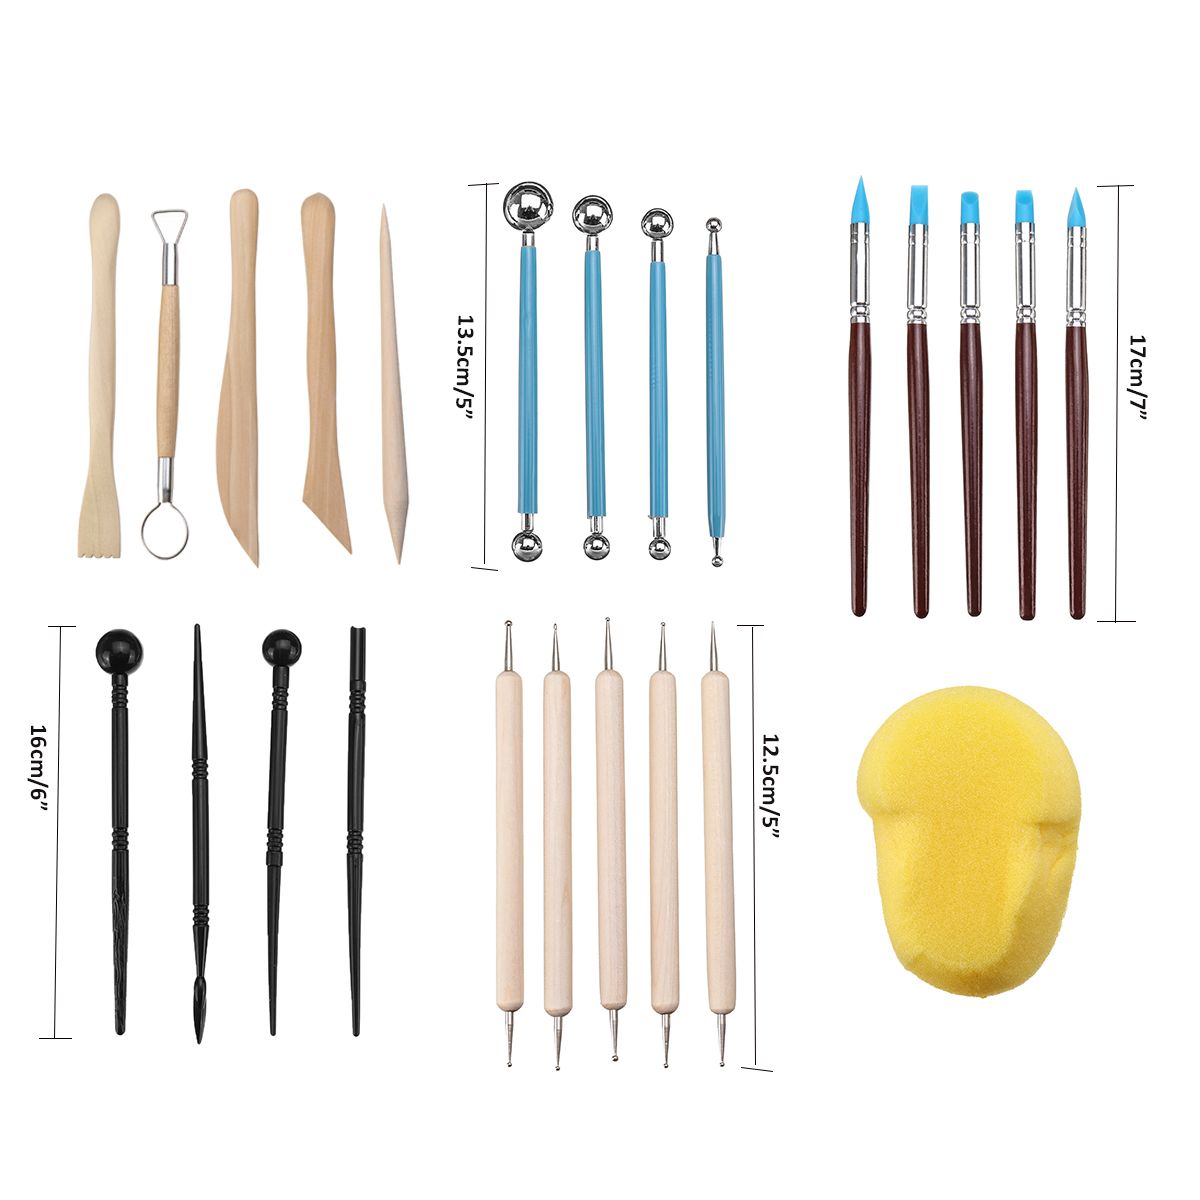 24pcs-Clay-Carving-Pottery-Tools-Polymer-Modeling-DIY-Sculpture-Craft-Holder-1691604